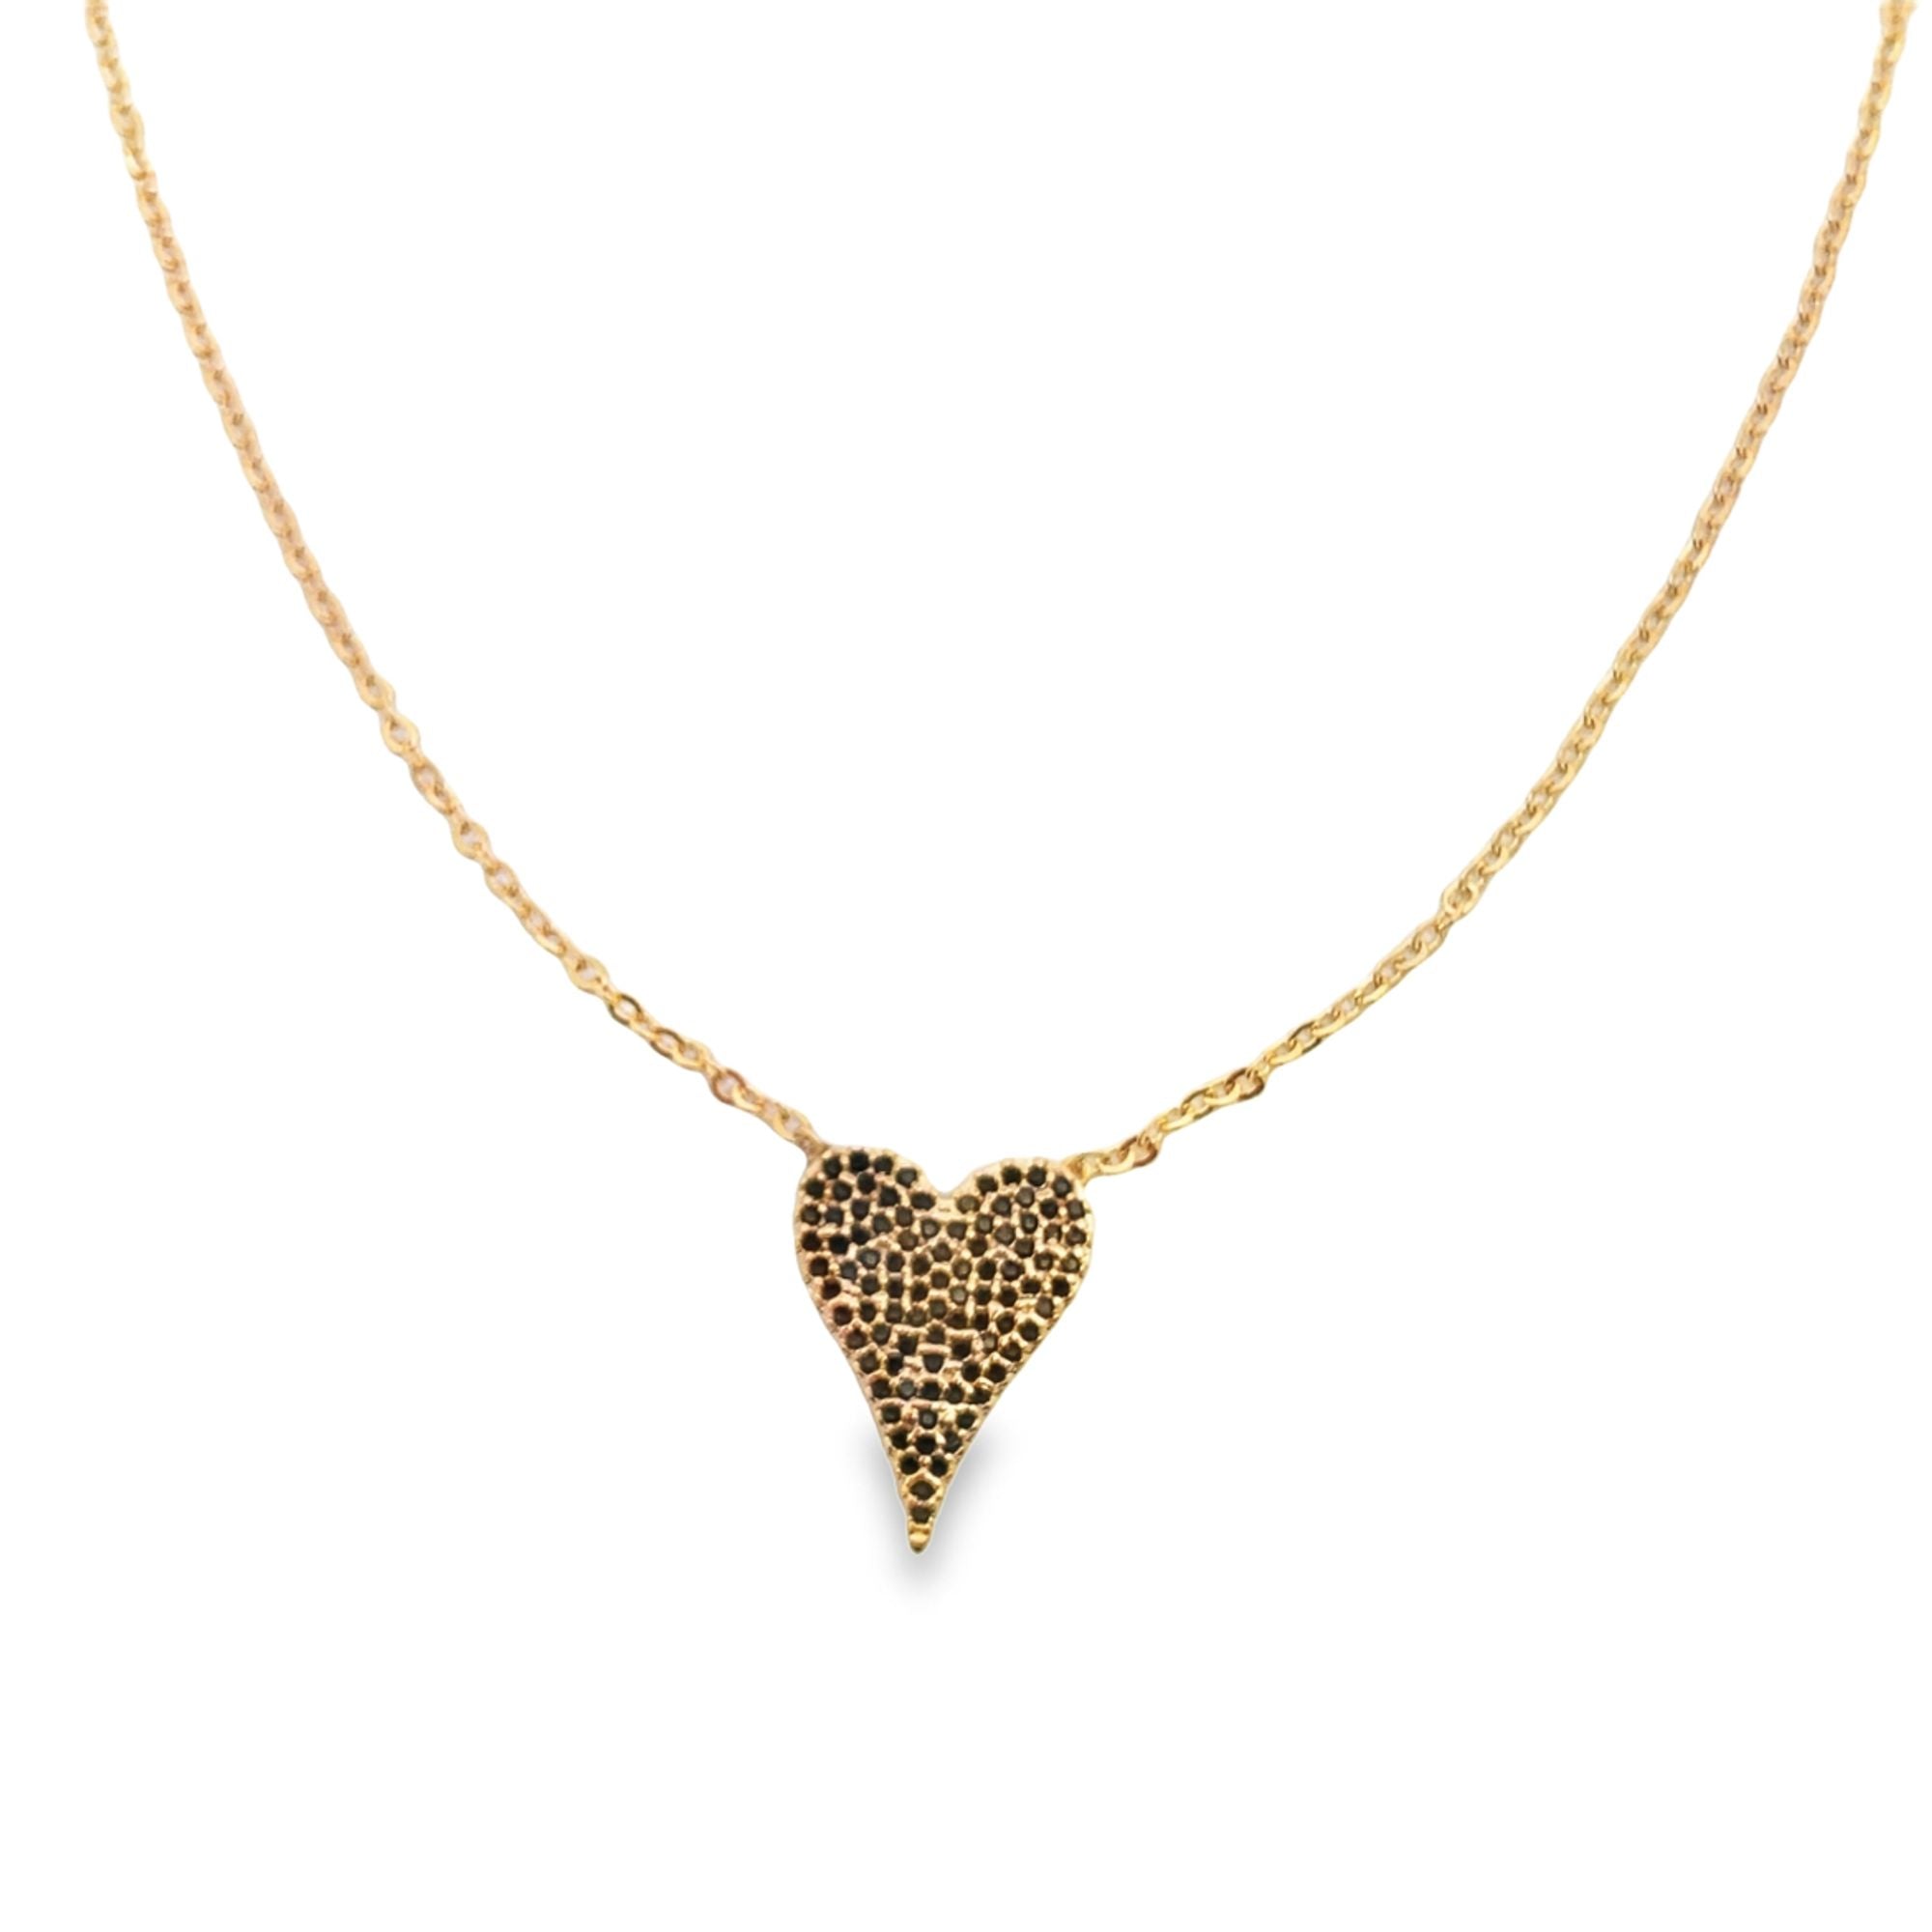 Heart Pendant Dainty Delicate Rolo Chain Necklace With Clear Micro CZ Stones (G90)